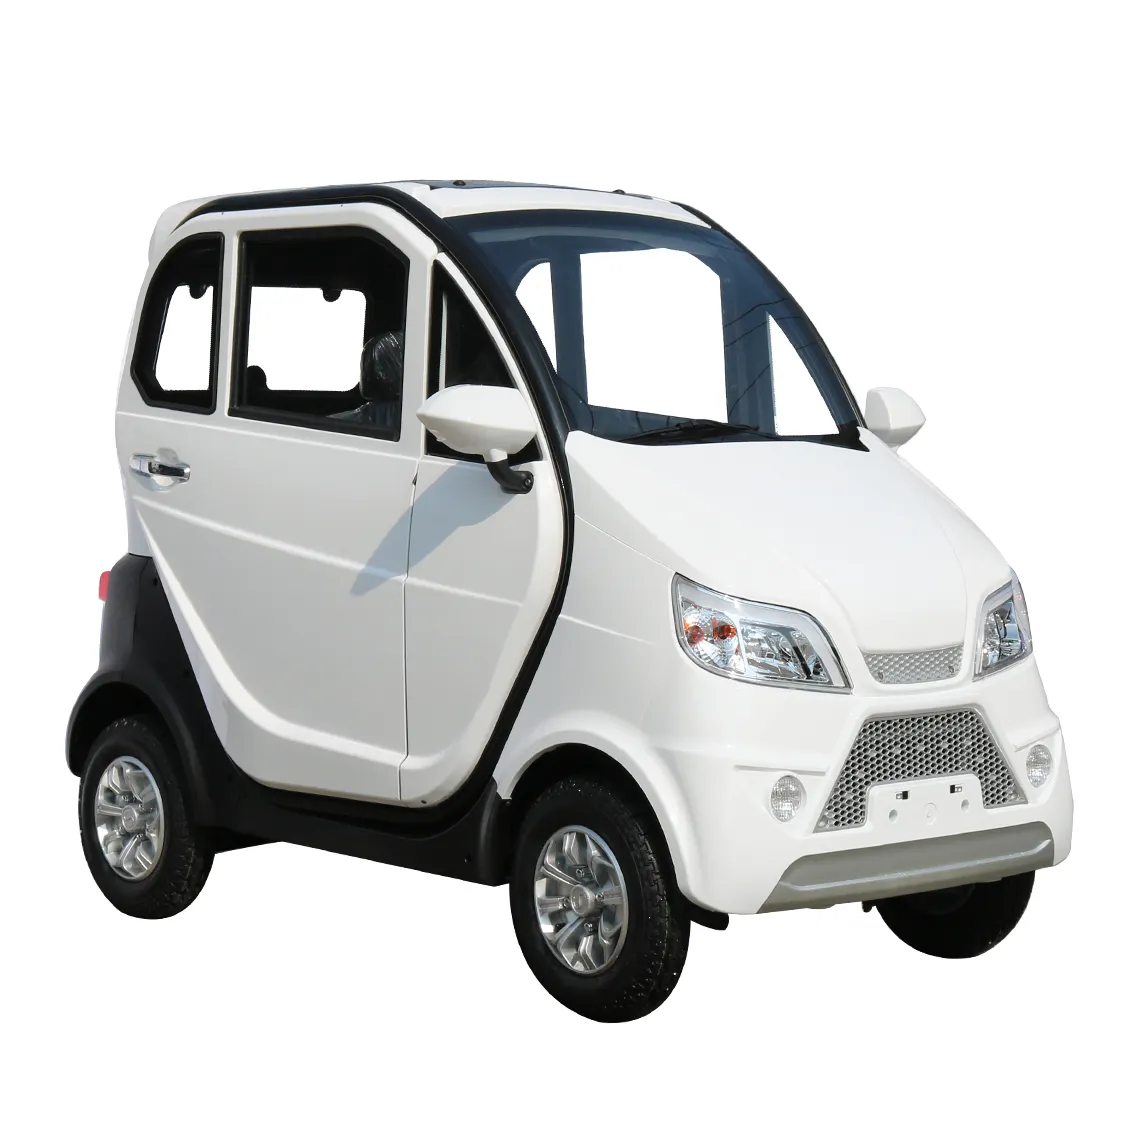 changli electric mini car New Energy electric car fully enclosed scooter tuk tuks taxi for sale